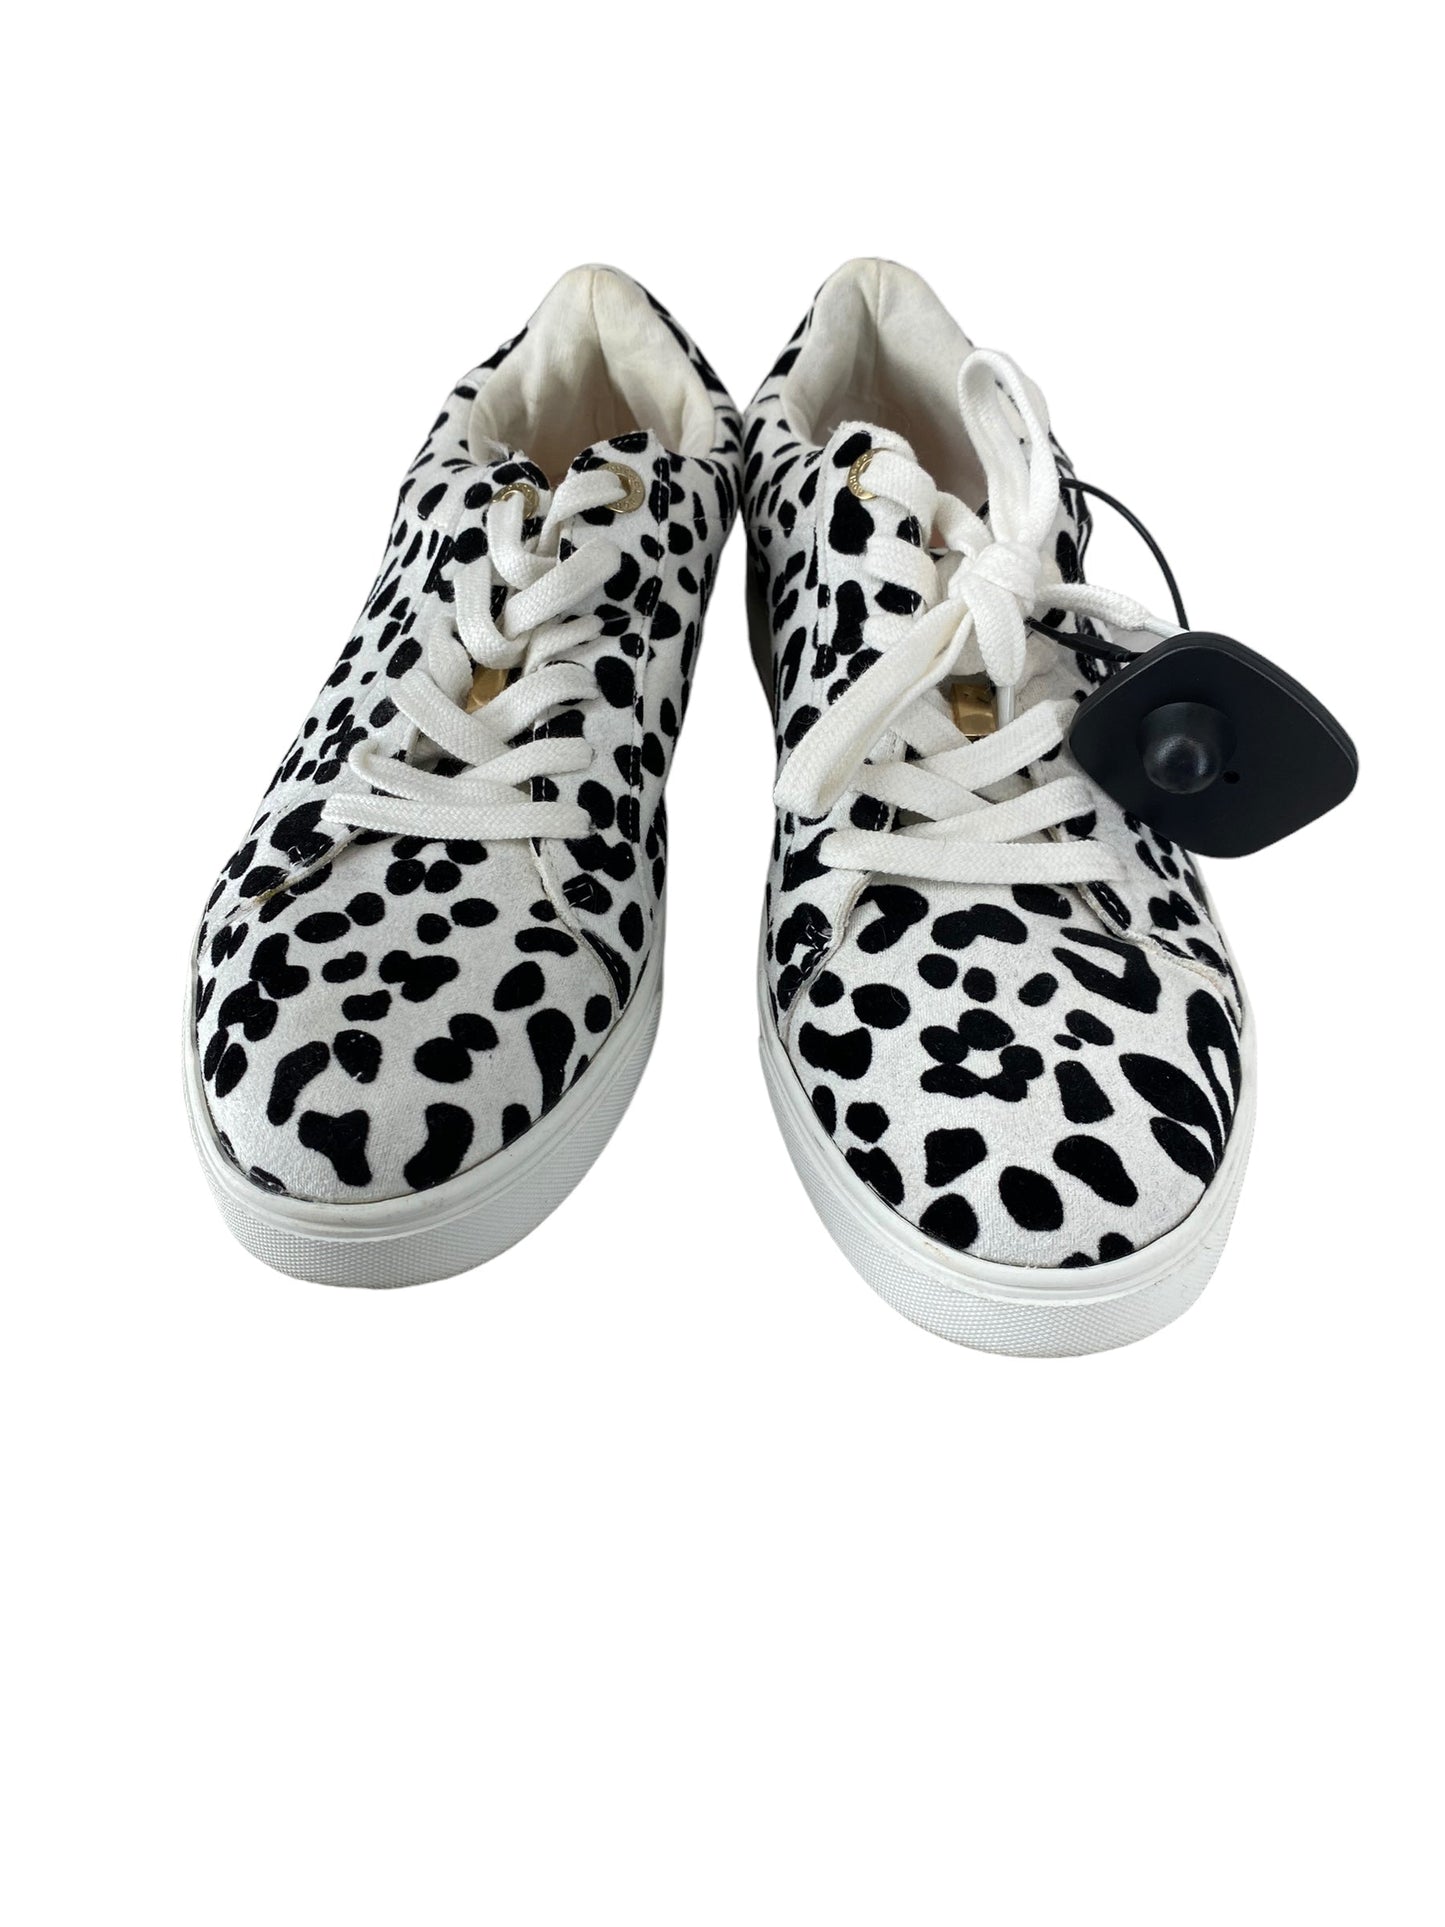 Black & White Shoes Sneakers Top Shop, Size 8.5